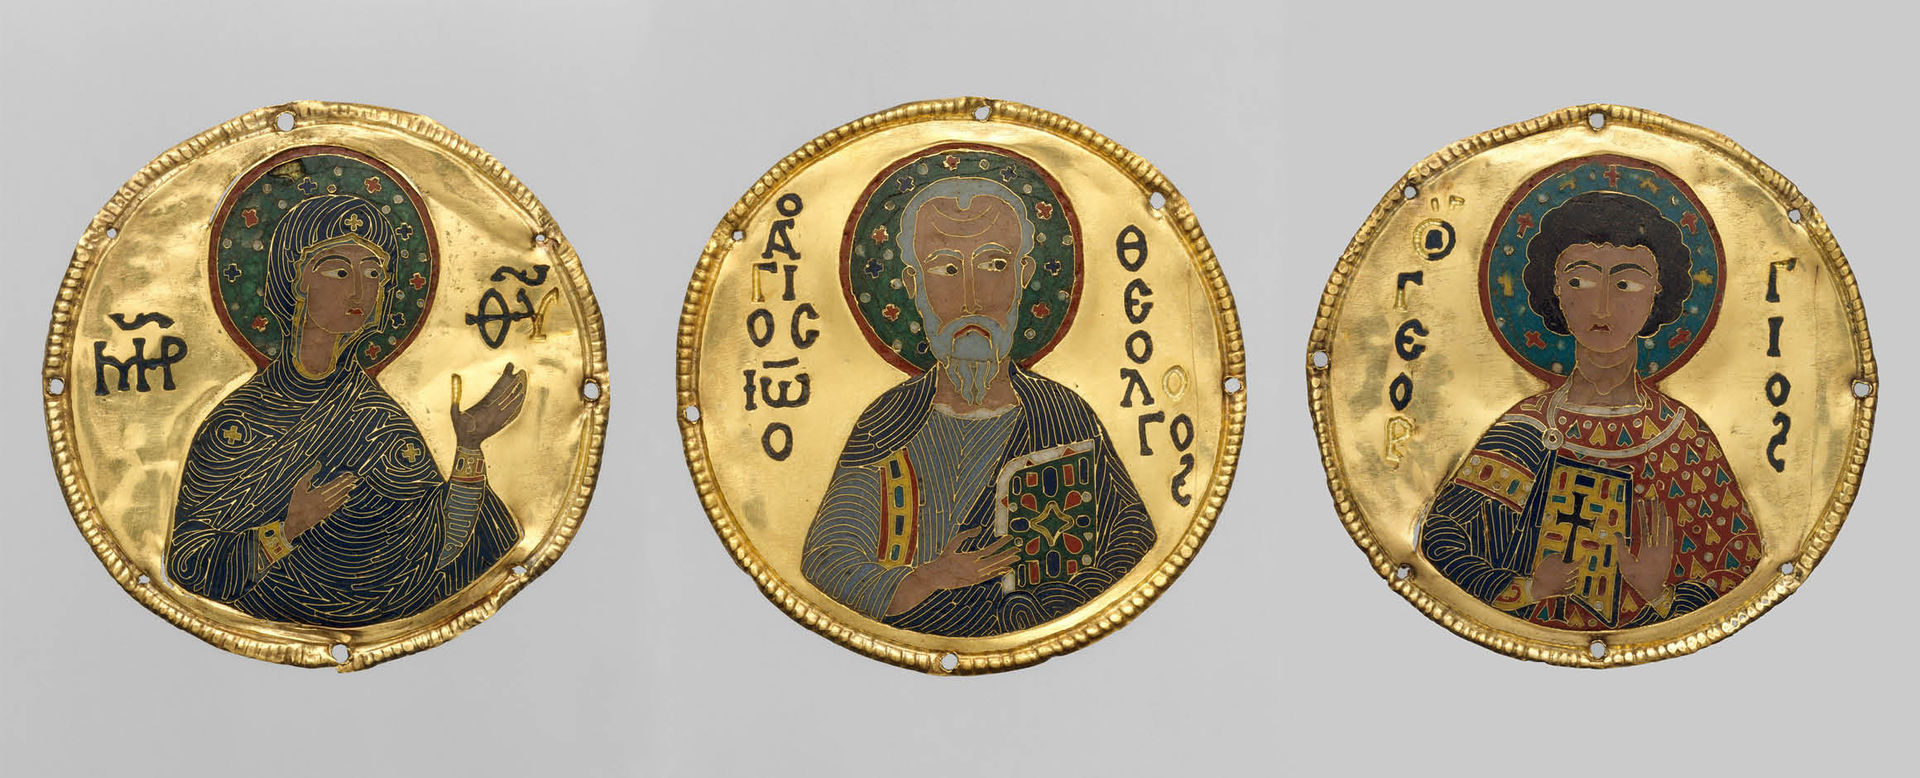 Three Byzantine-era medallions against a gray background. From left to right, the medallions depict the Virgin Mary, Saint John the Evangelist, and Saint George in colorful, gold-accented detail.